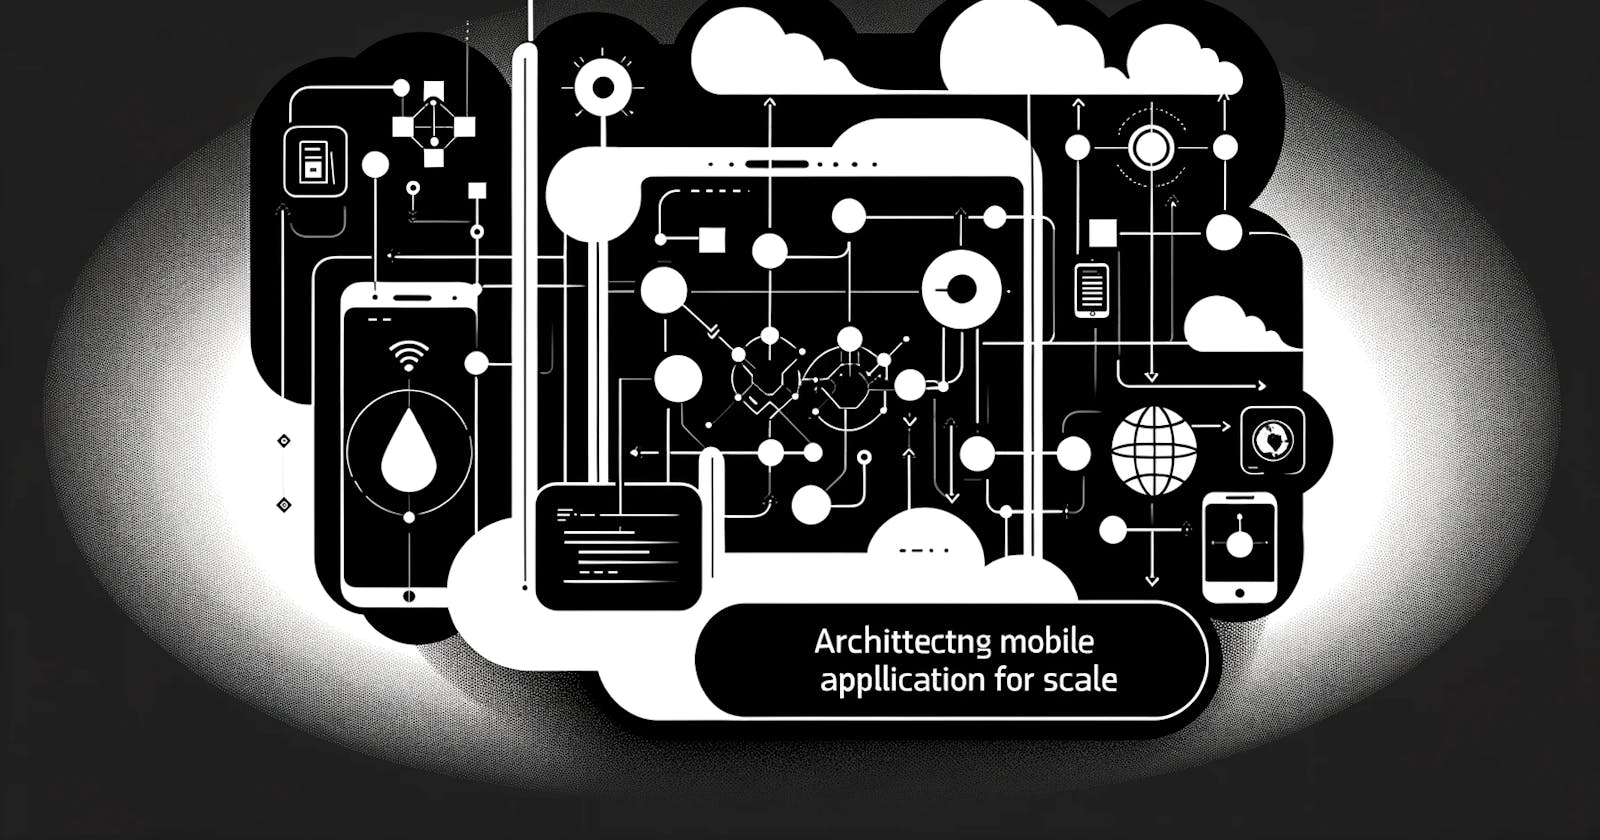 Chapter #2: Architecting the App for Scale